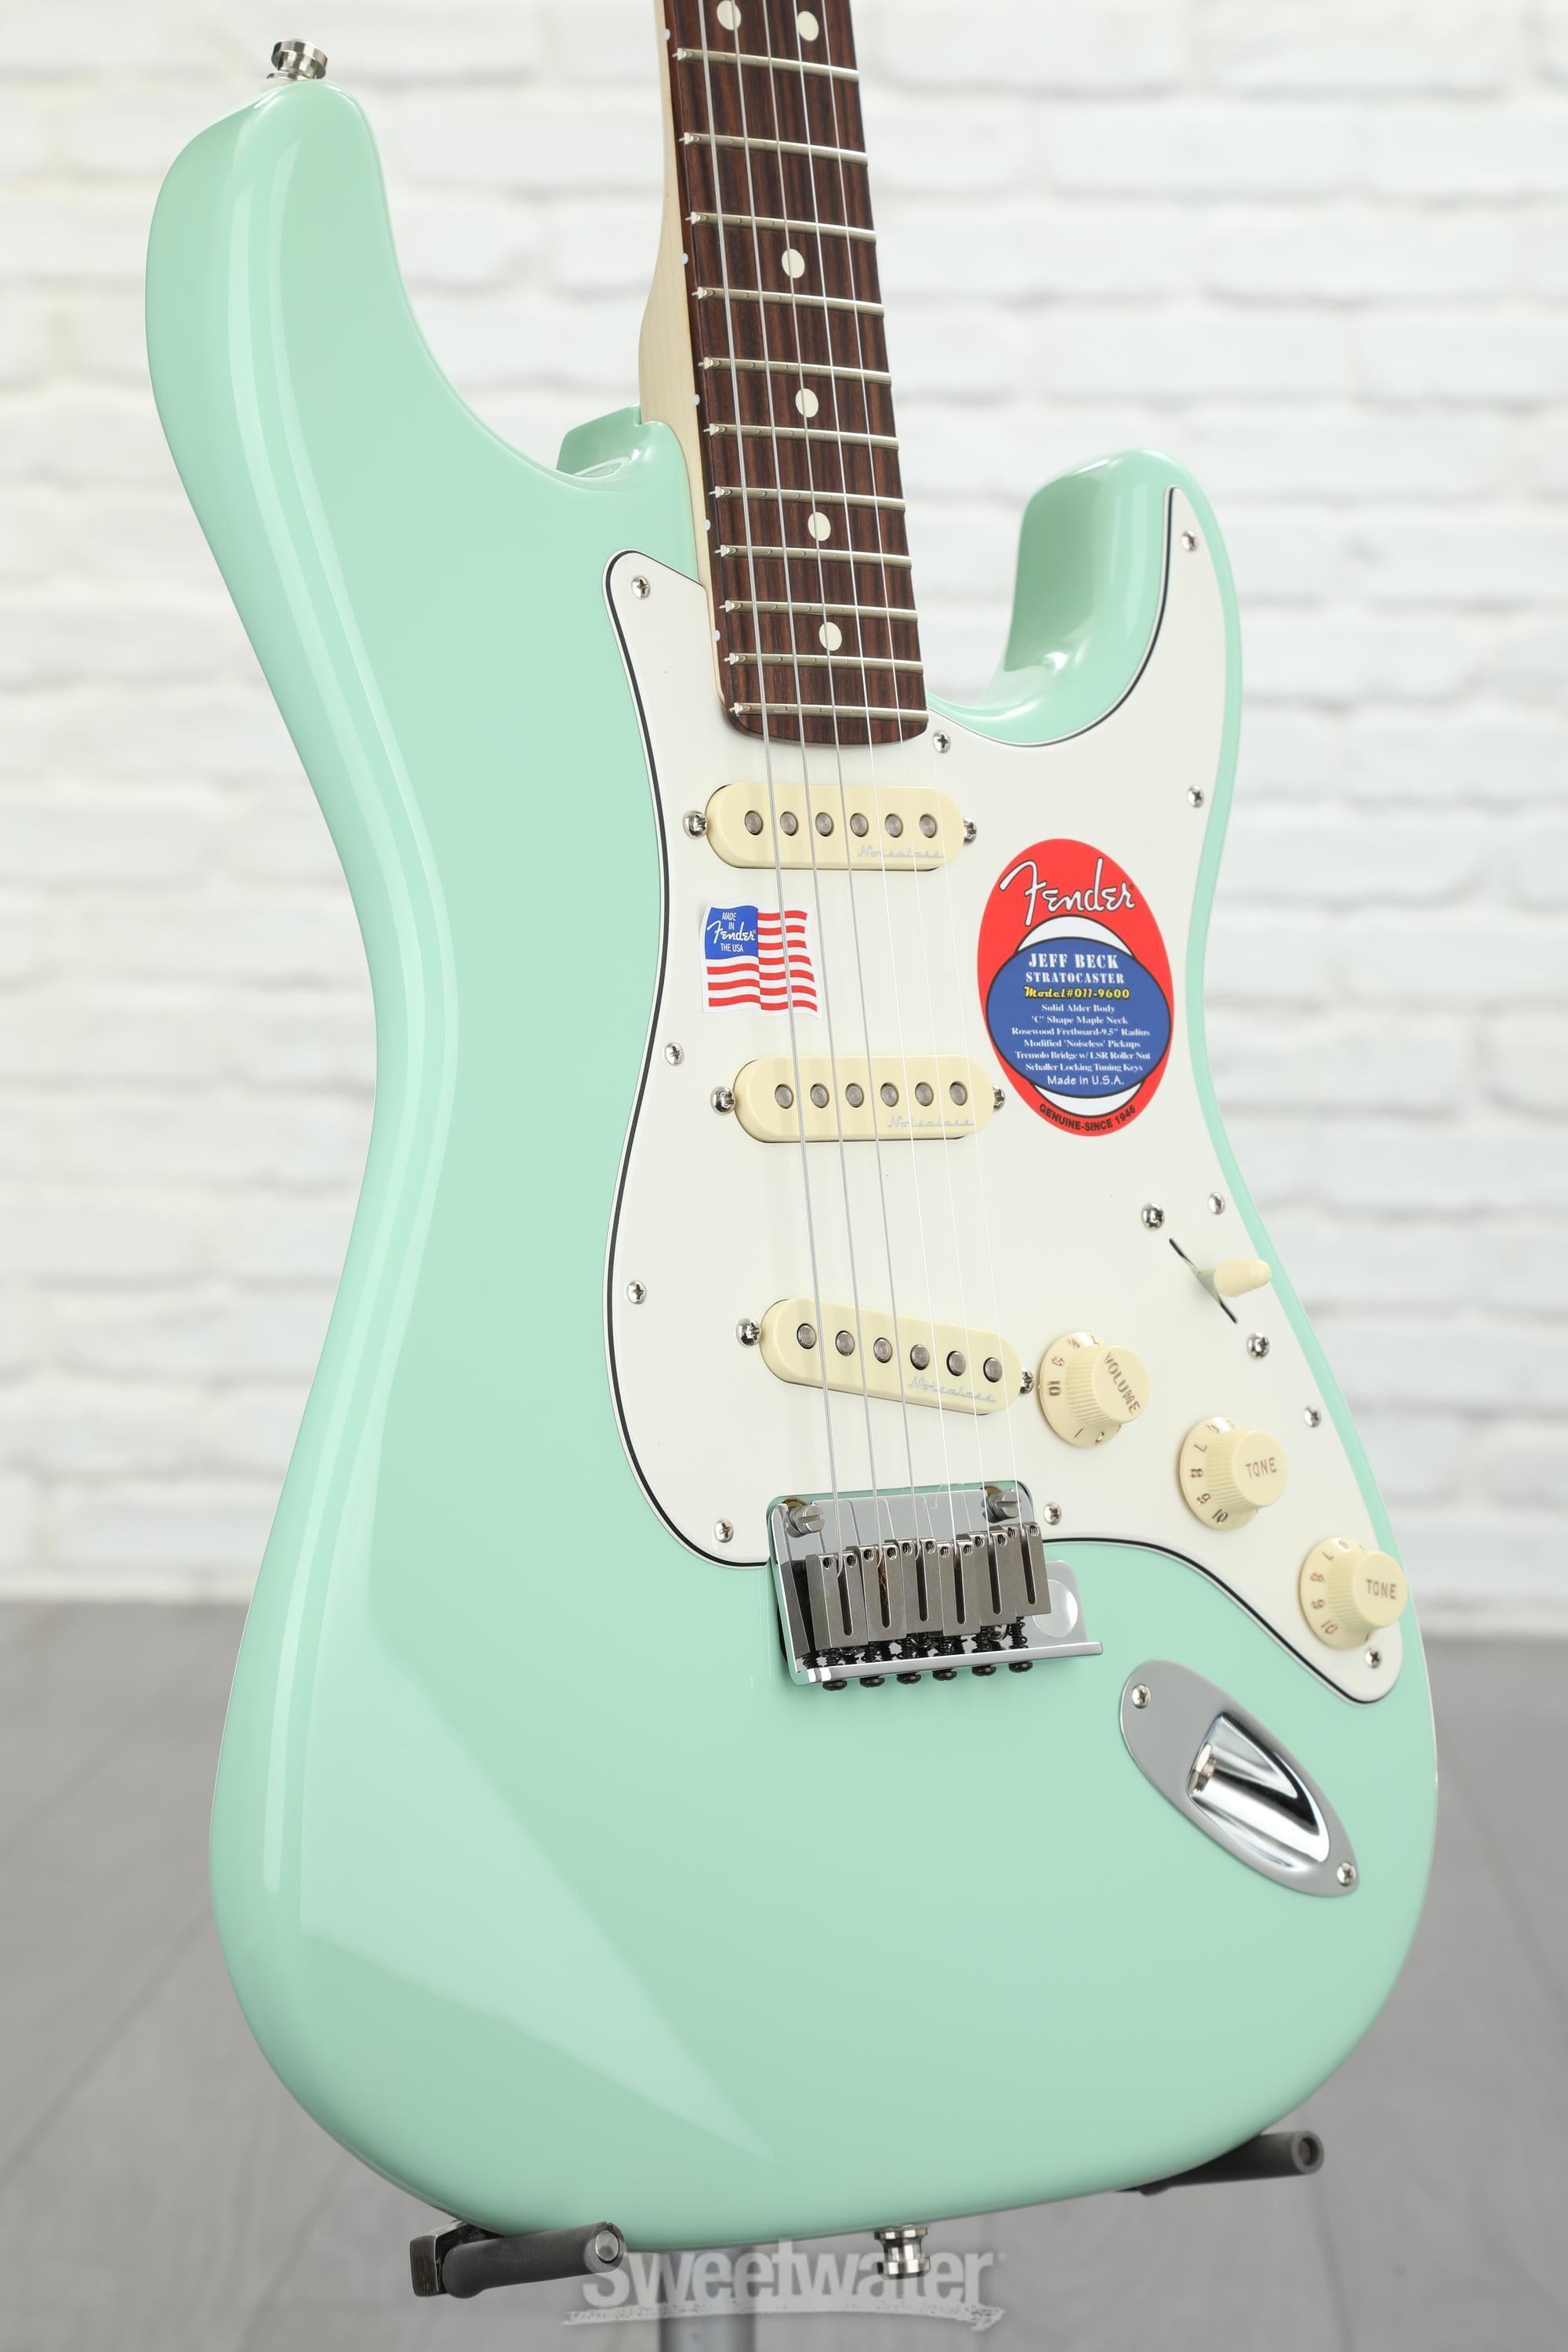 Fender Jeff Beck Stratocaster - Surf Green with Rosewood Fingerboard |  Sweetwater